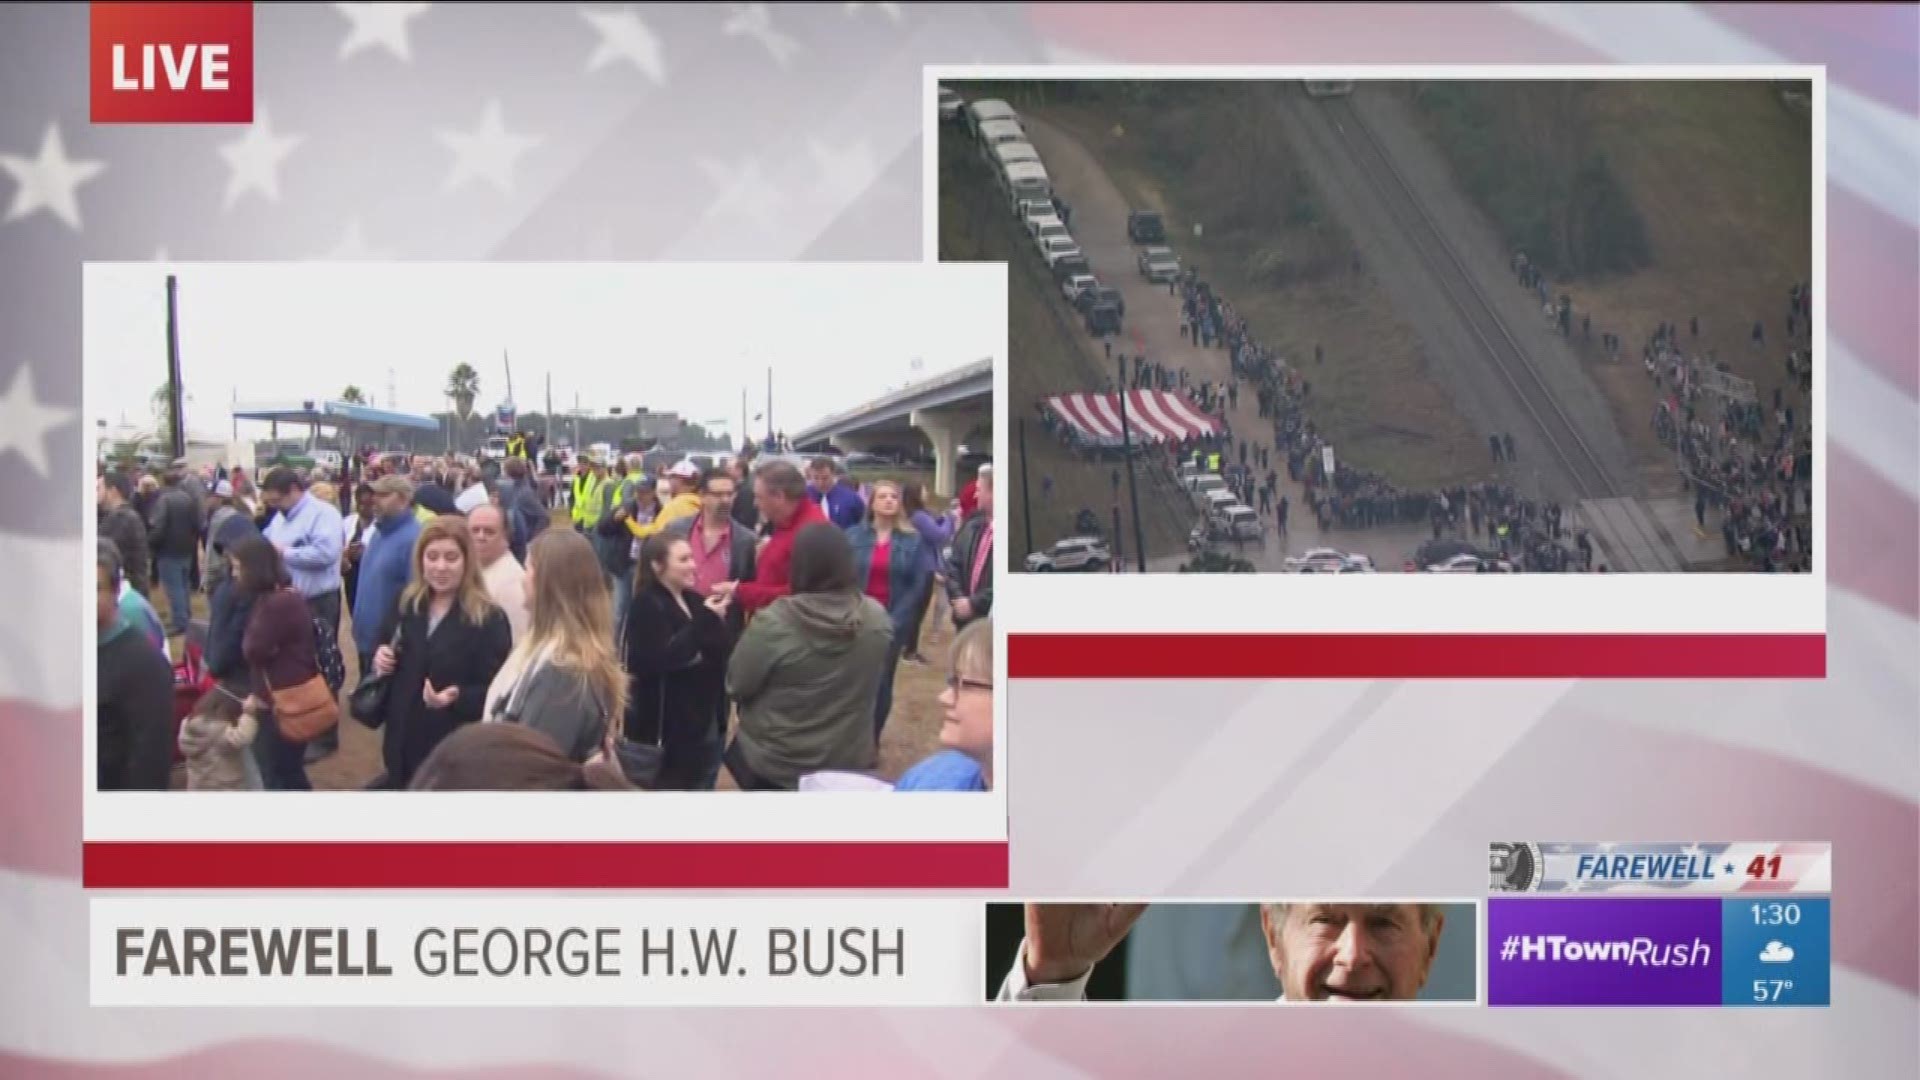 Thousands of people lined the railroad tracks as the Bush 41 train carrying President George H.W. Bush and his family passed through the Klein area Thursday afternoon.